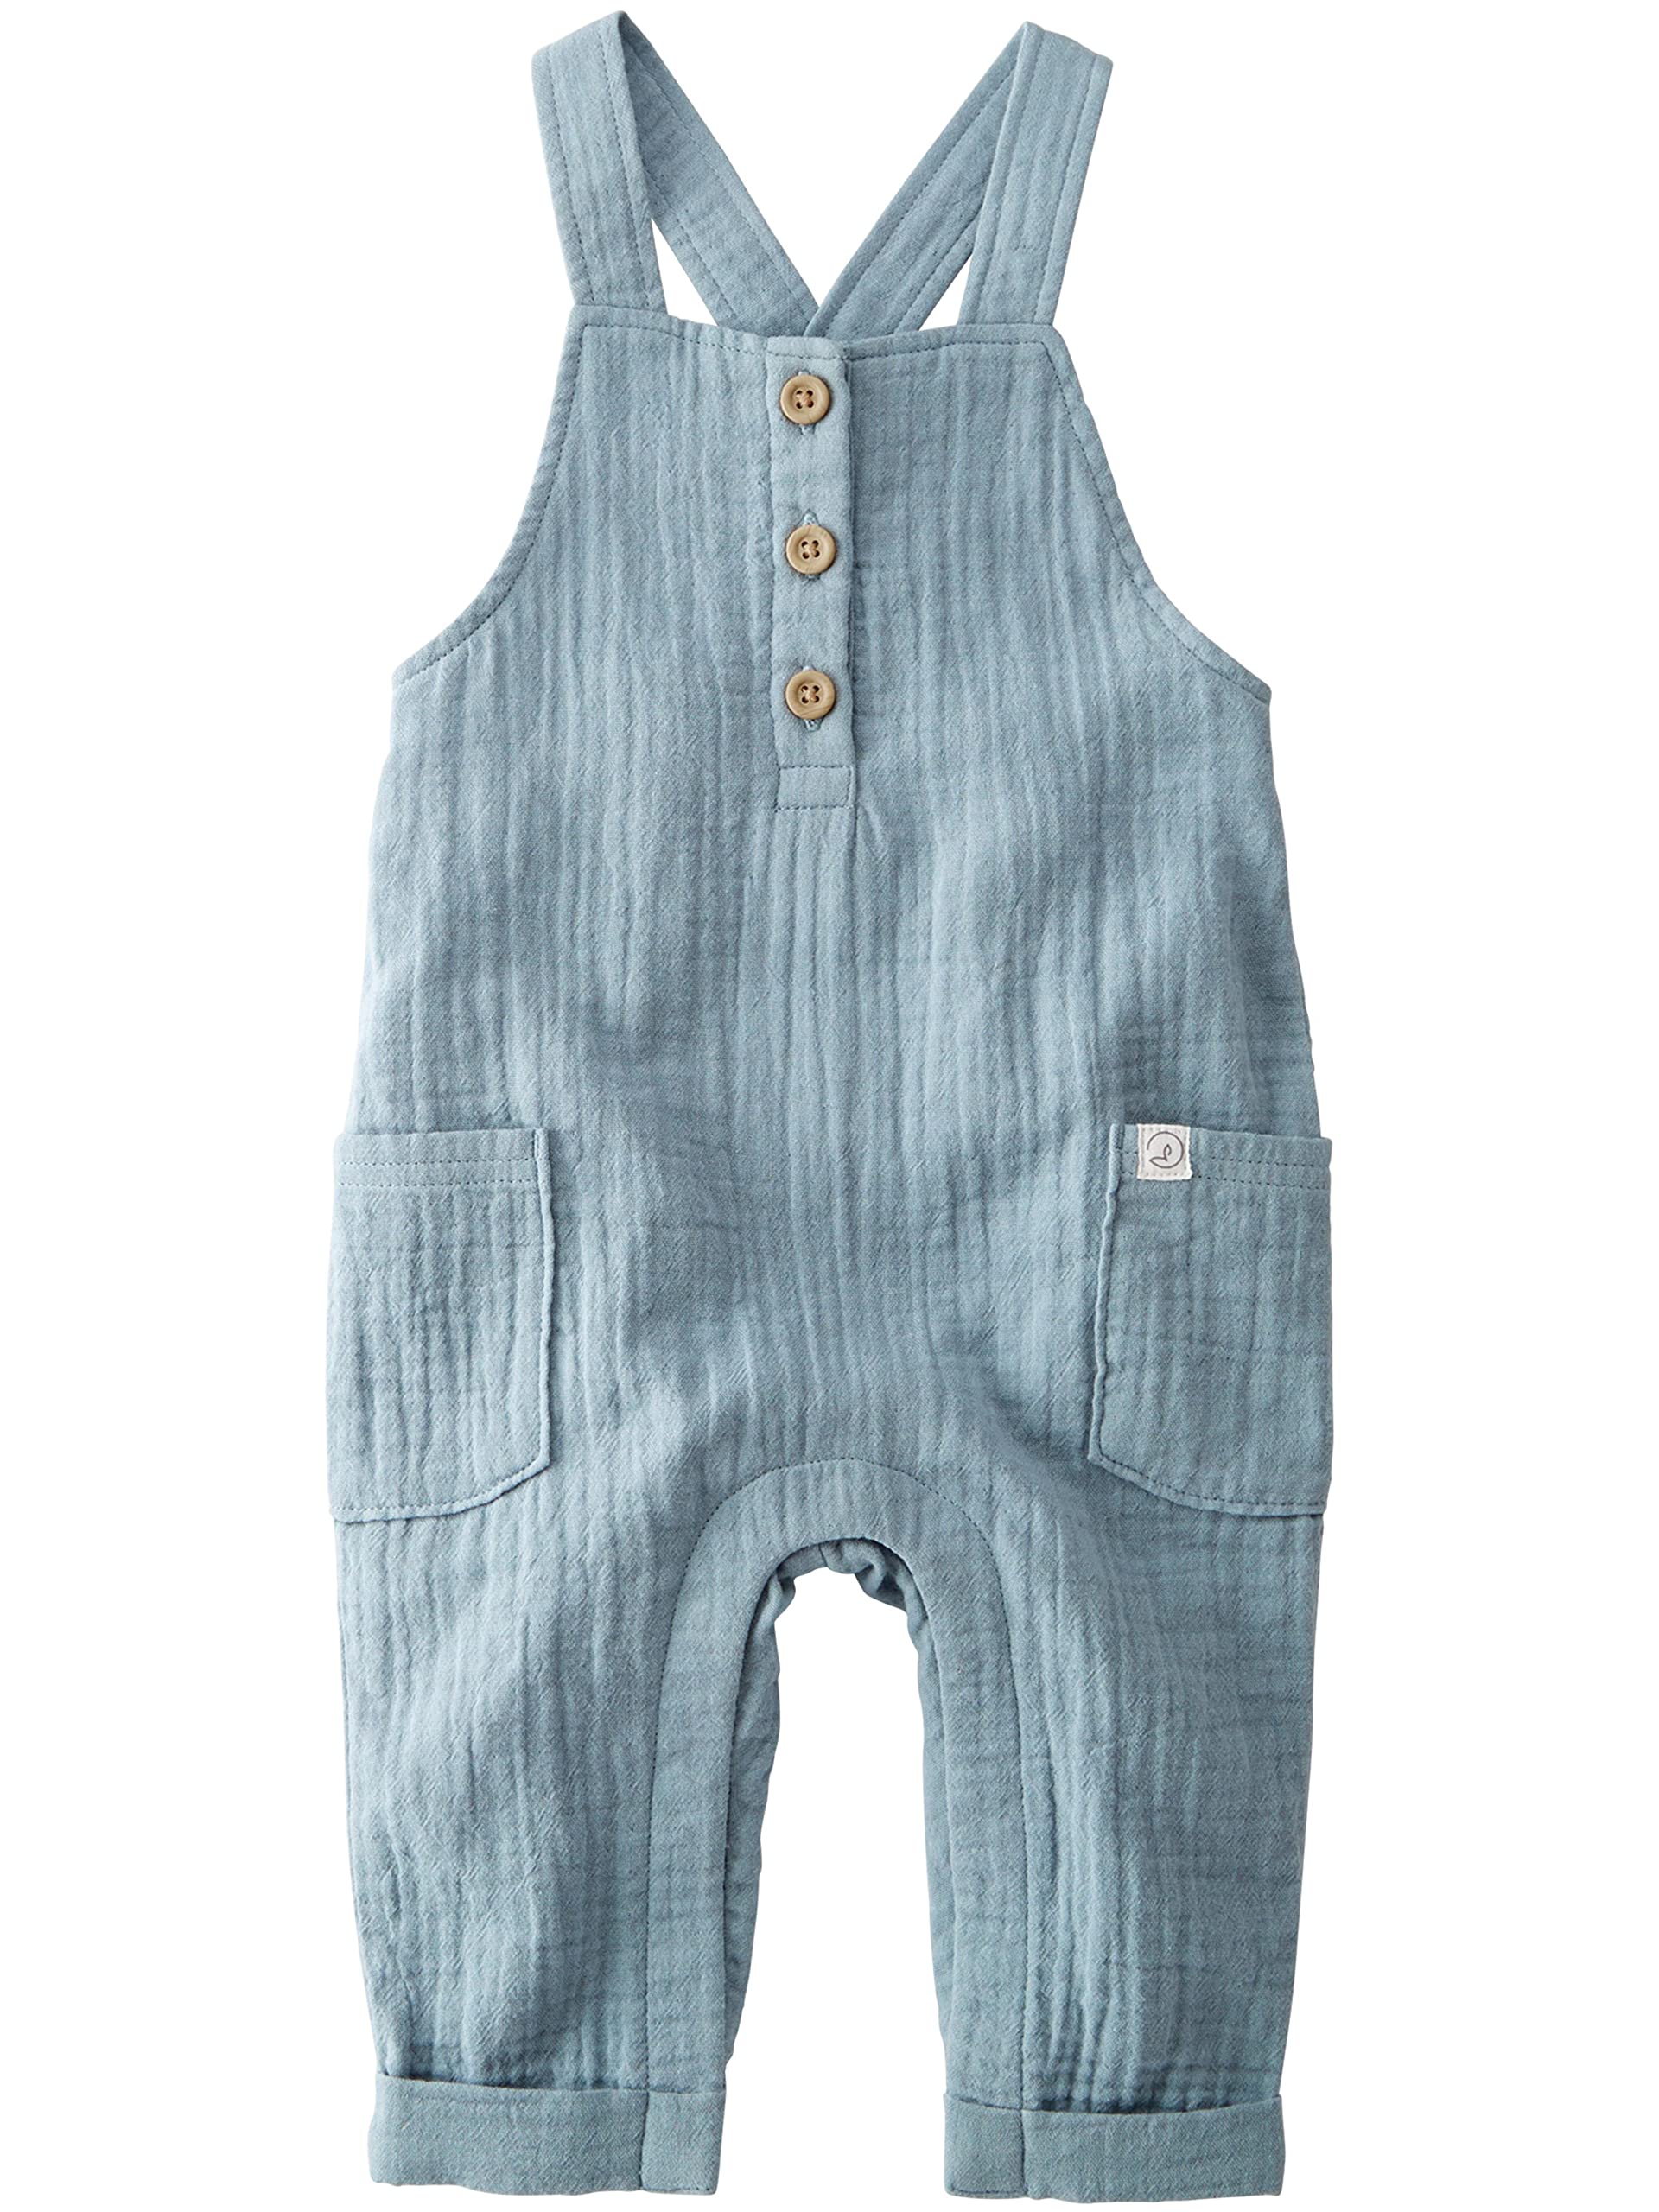 little planet by carter's Baby Girls Organic Cotton Gauze Overall Jumpsuit, Blue Creek, 6 Months US